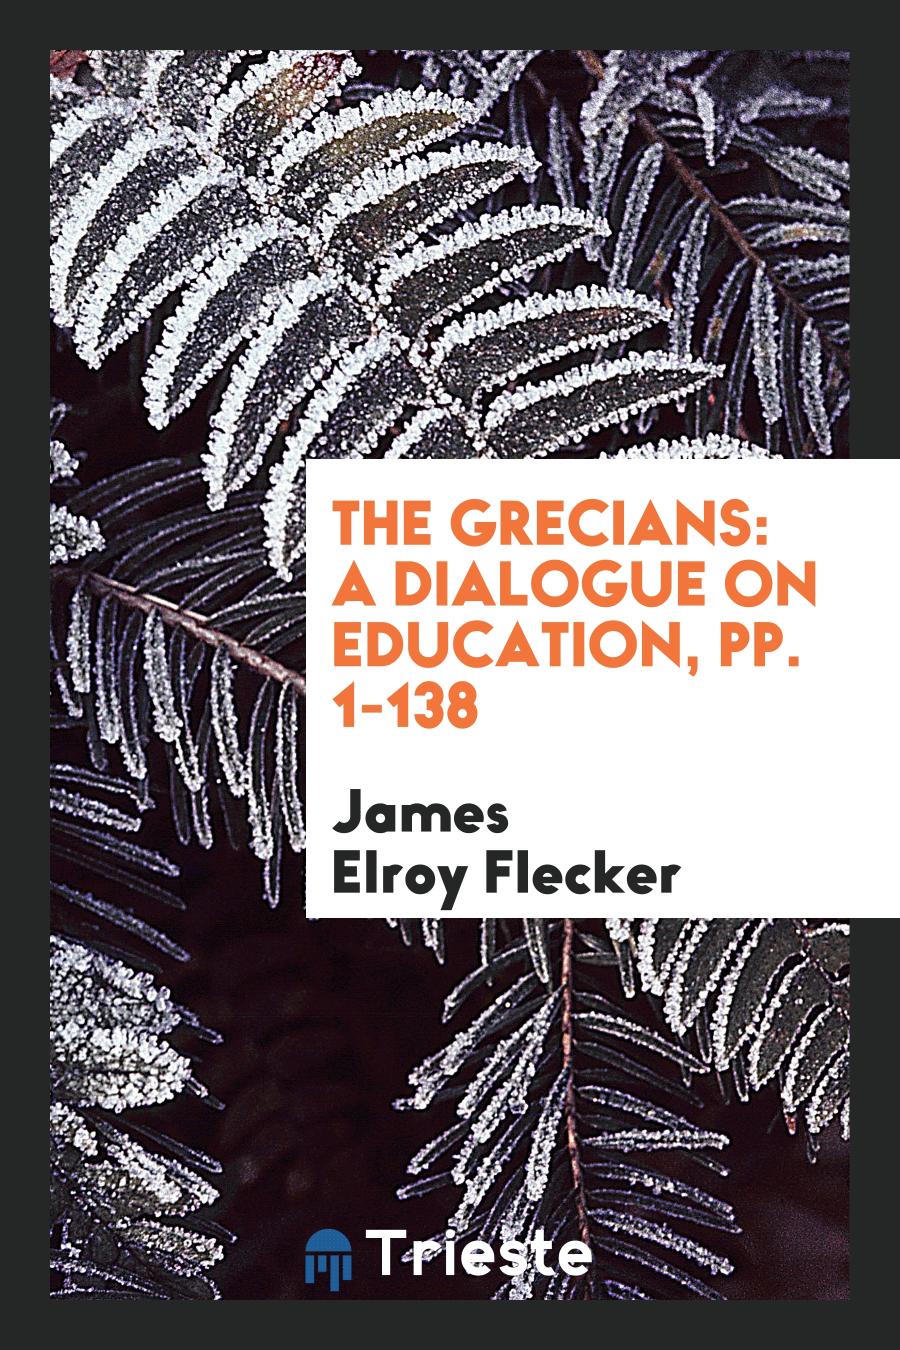 The Grecians: A Dialogue on Education, pp. 1-138